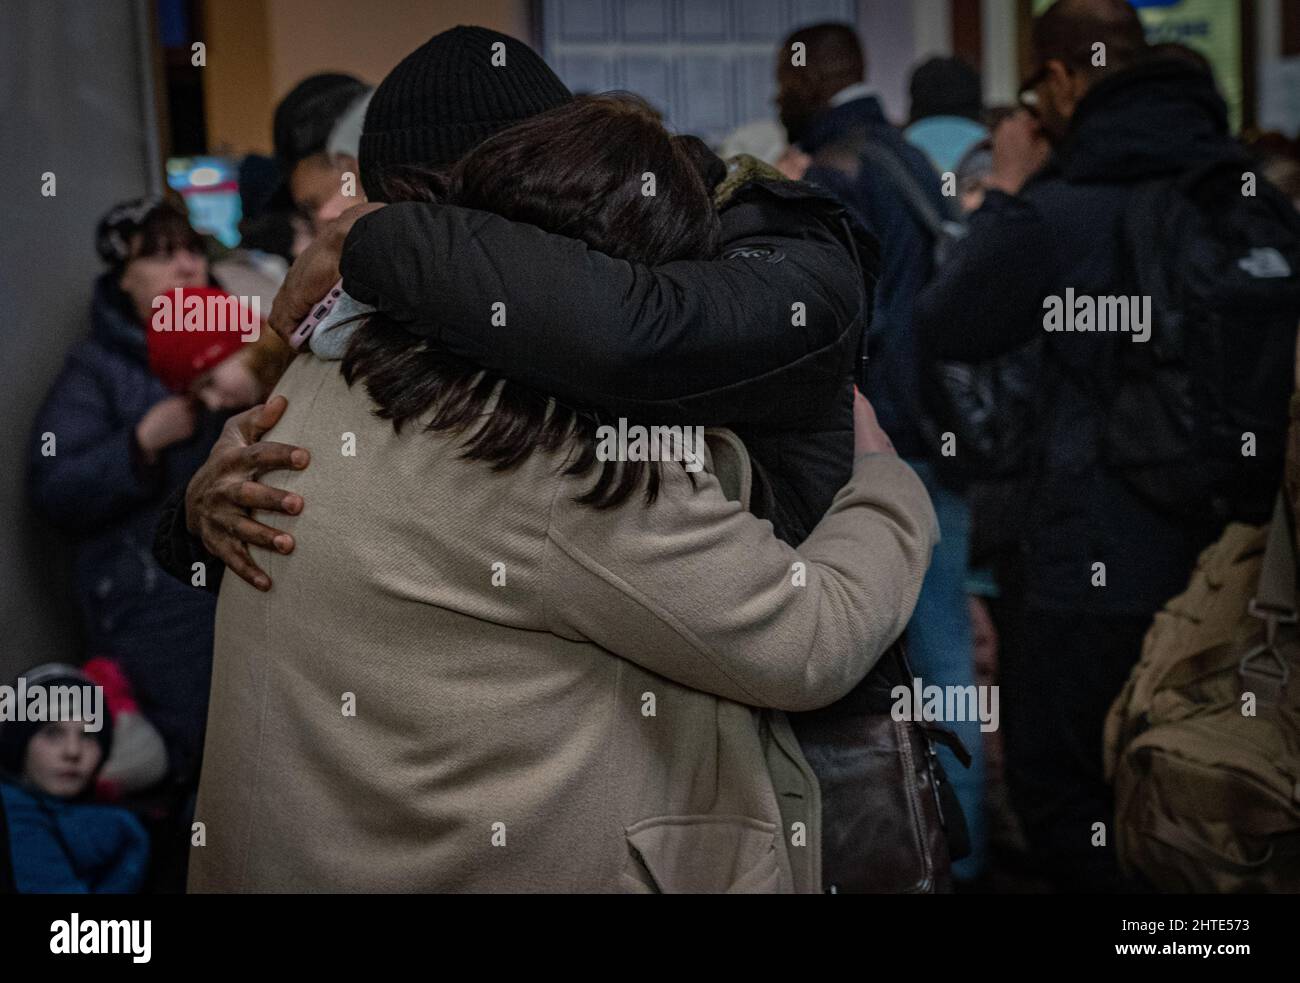 27th February 2022. Lviv Train Station, Ukraine. An emotional couple reunite at Lviv station after fleeing war as desperation grows at Ukraine border as more than half a million refugees flee war - Copyright: Bel Trew/The Credit: Independent/Alamy Live News Stock Photo